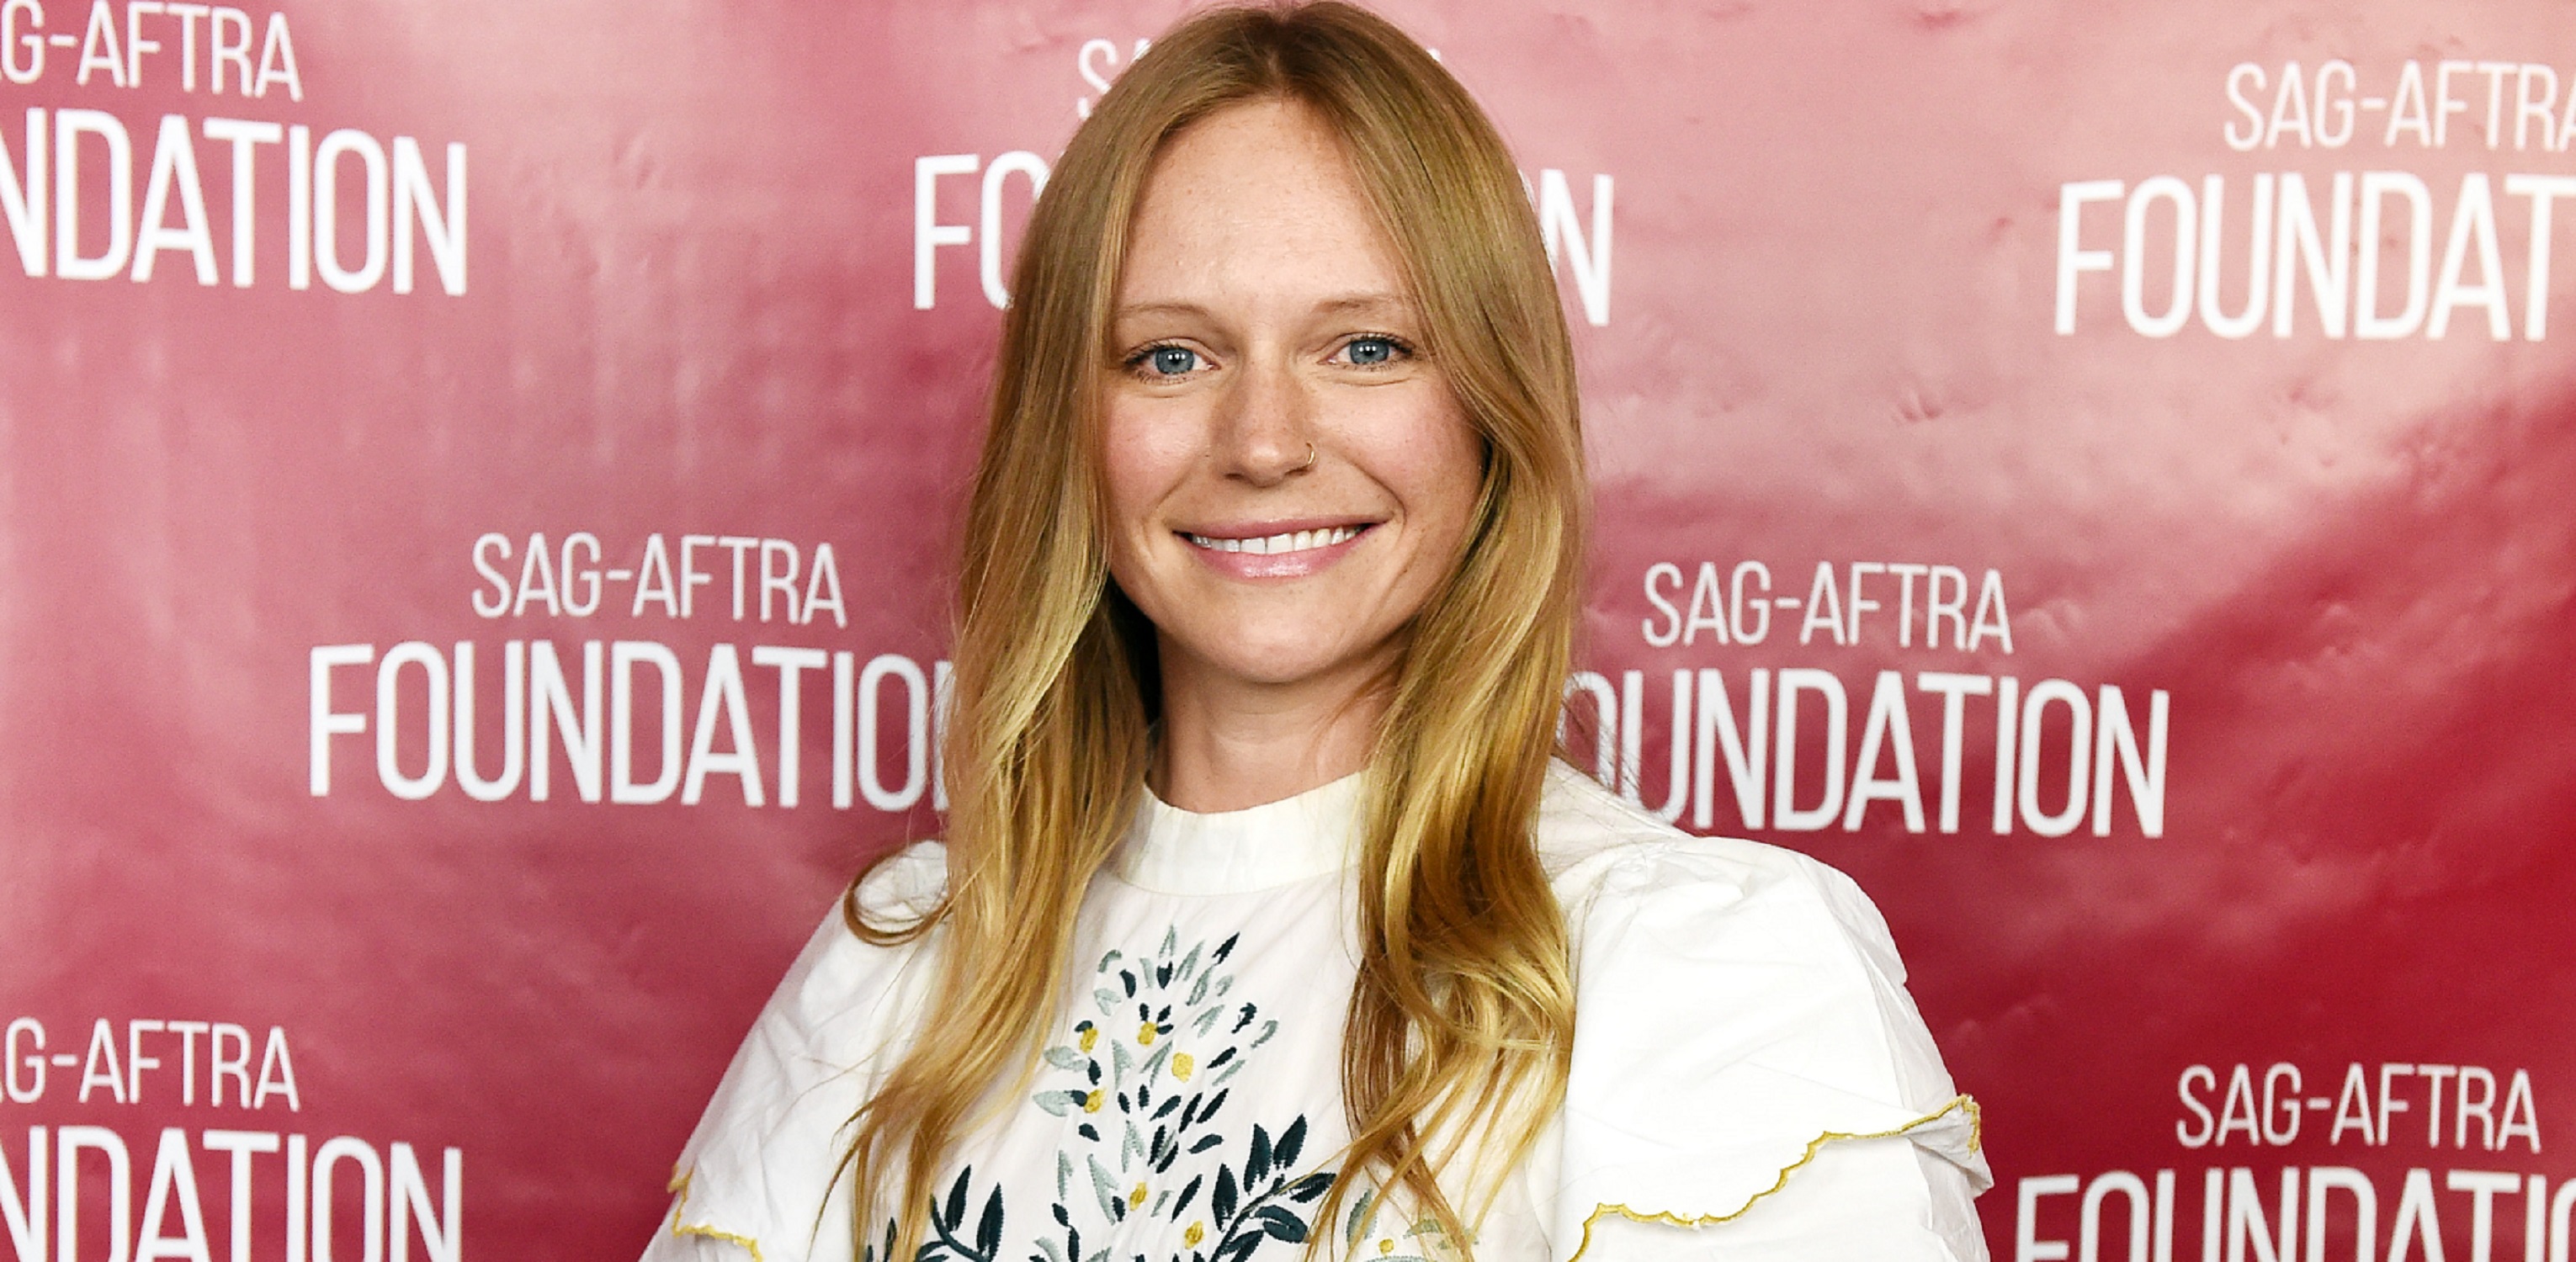 Days of Our Lives comings and goings focus on Marci Miller, pictured here in a white top